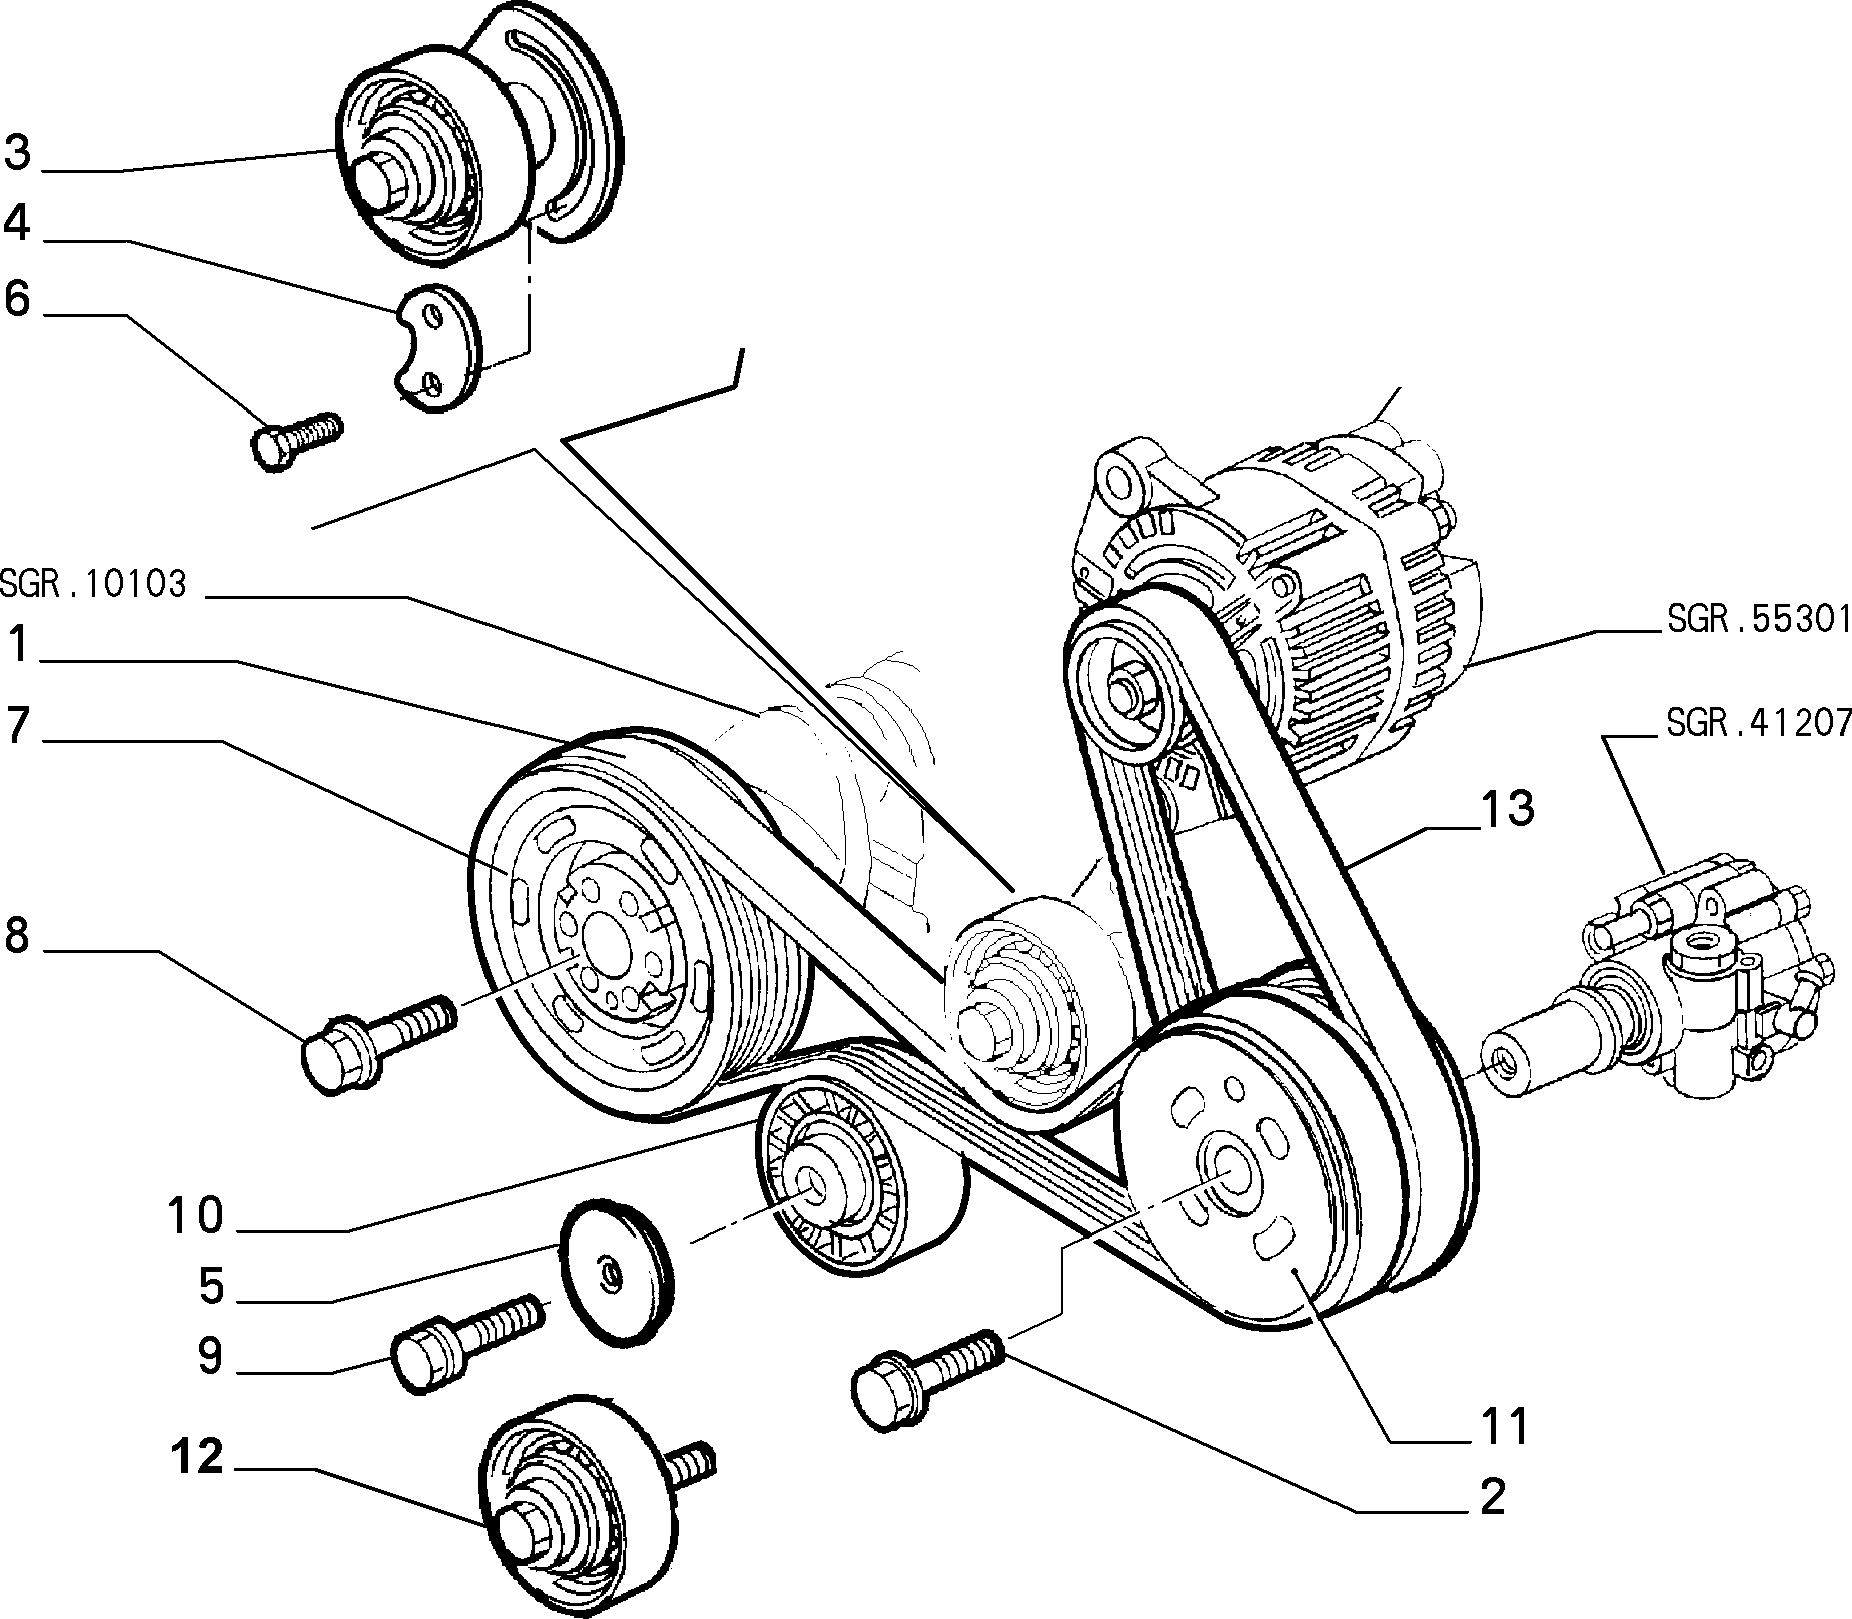 VARIOUS CONTROLS (BELTS AND PULLEYS) pour Fiat COUPE COUPE' GAMMA'96 (1996 - 2000)